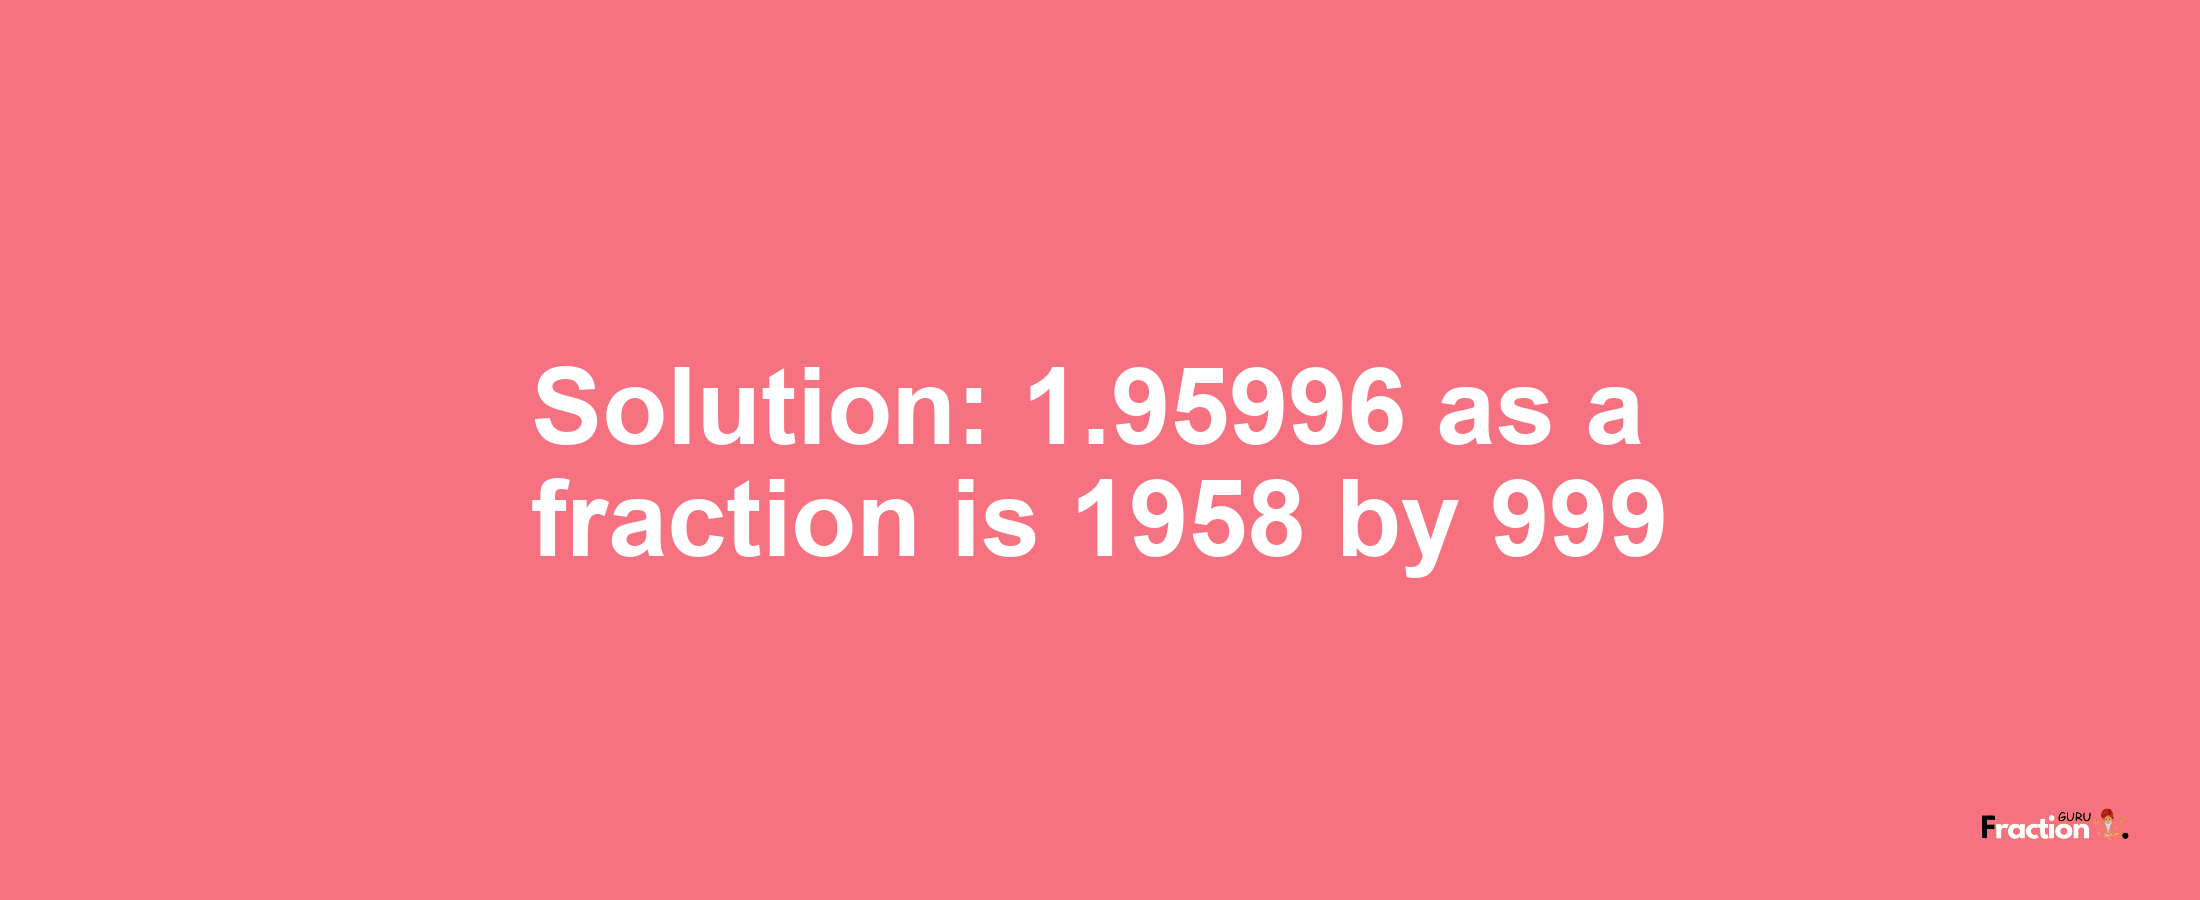 Solution:1.95996 as a fraction is 1958/999